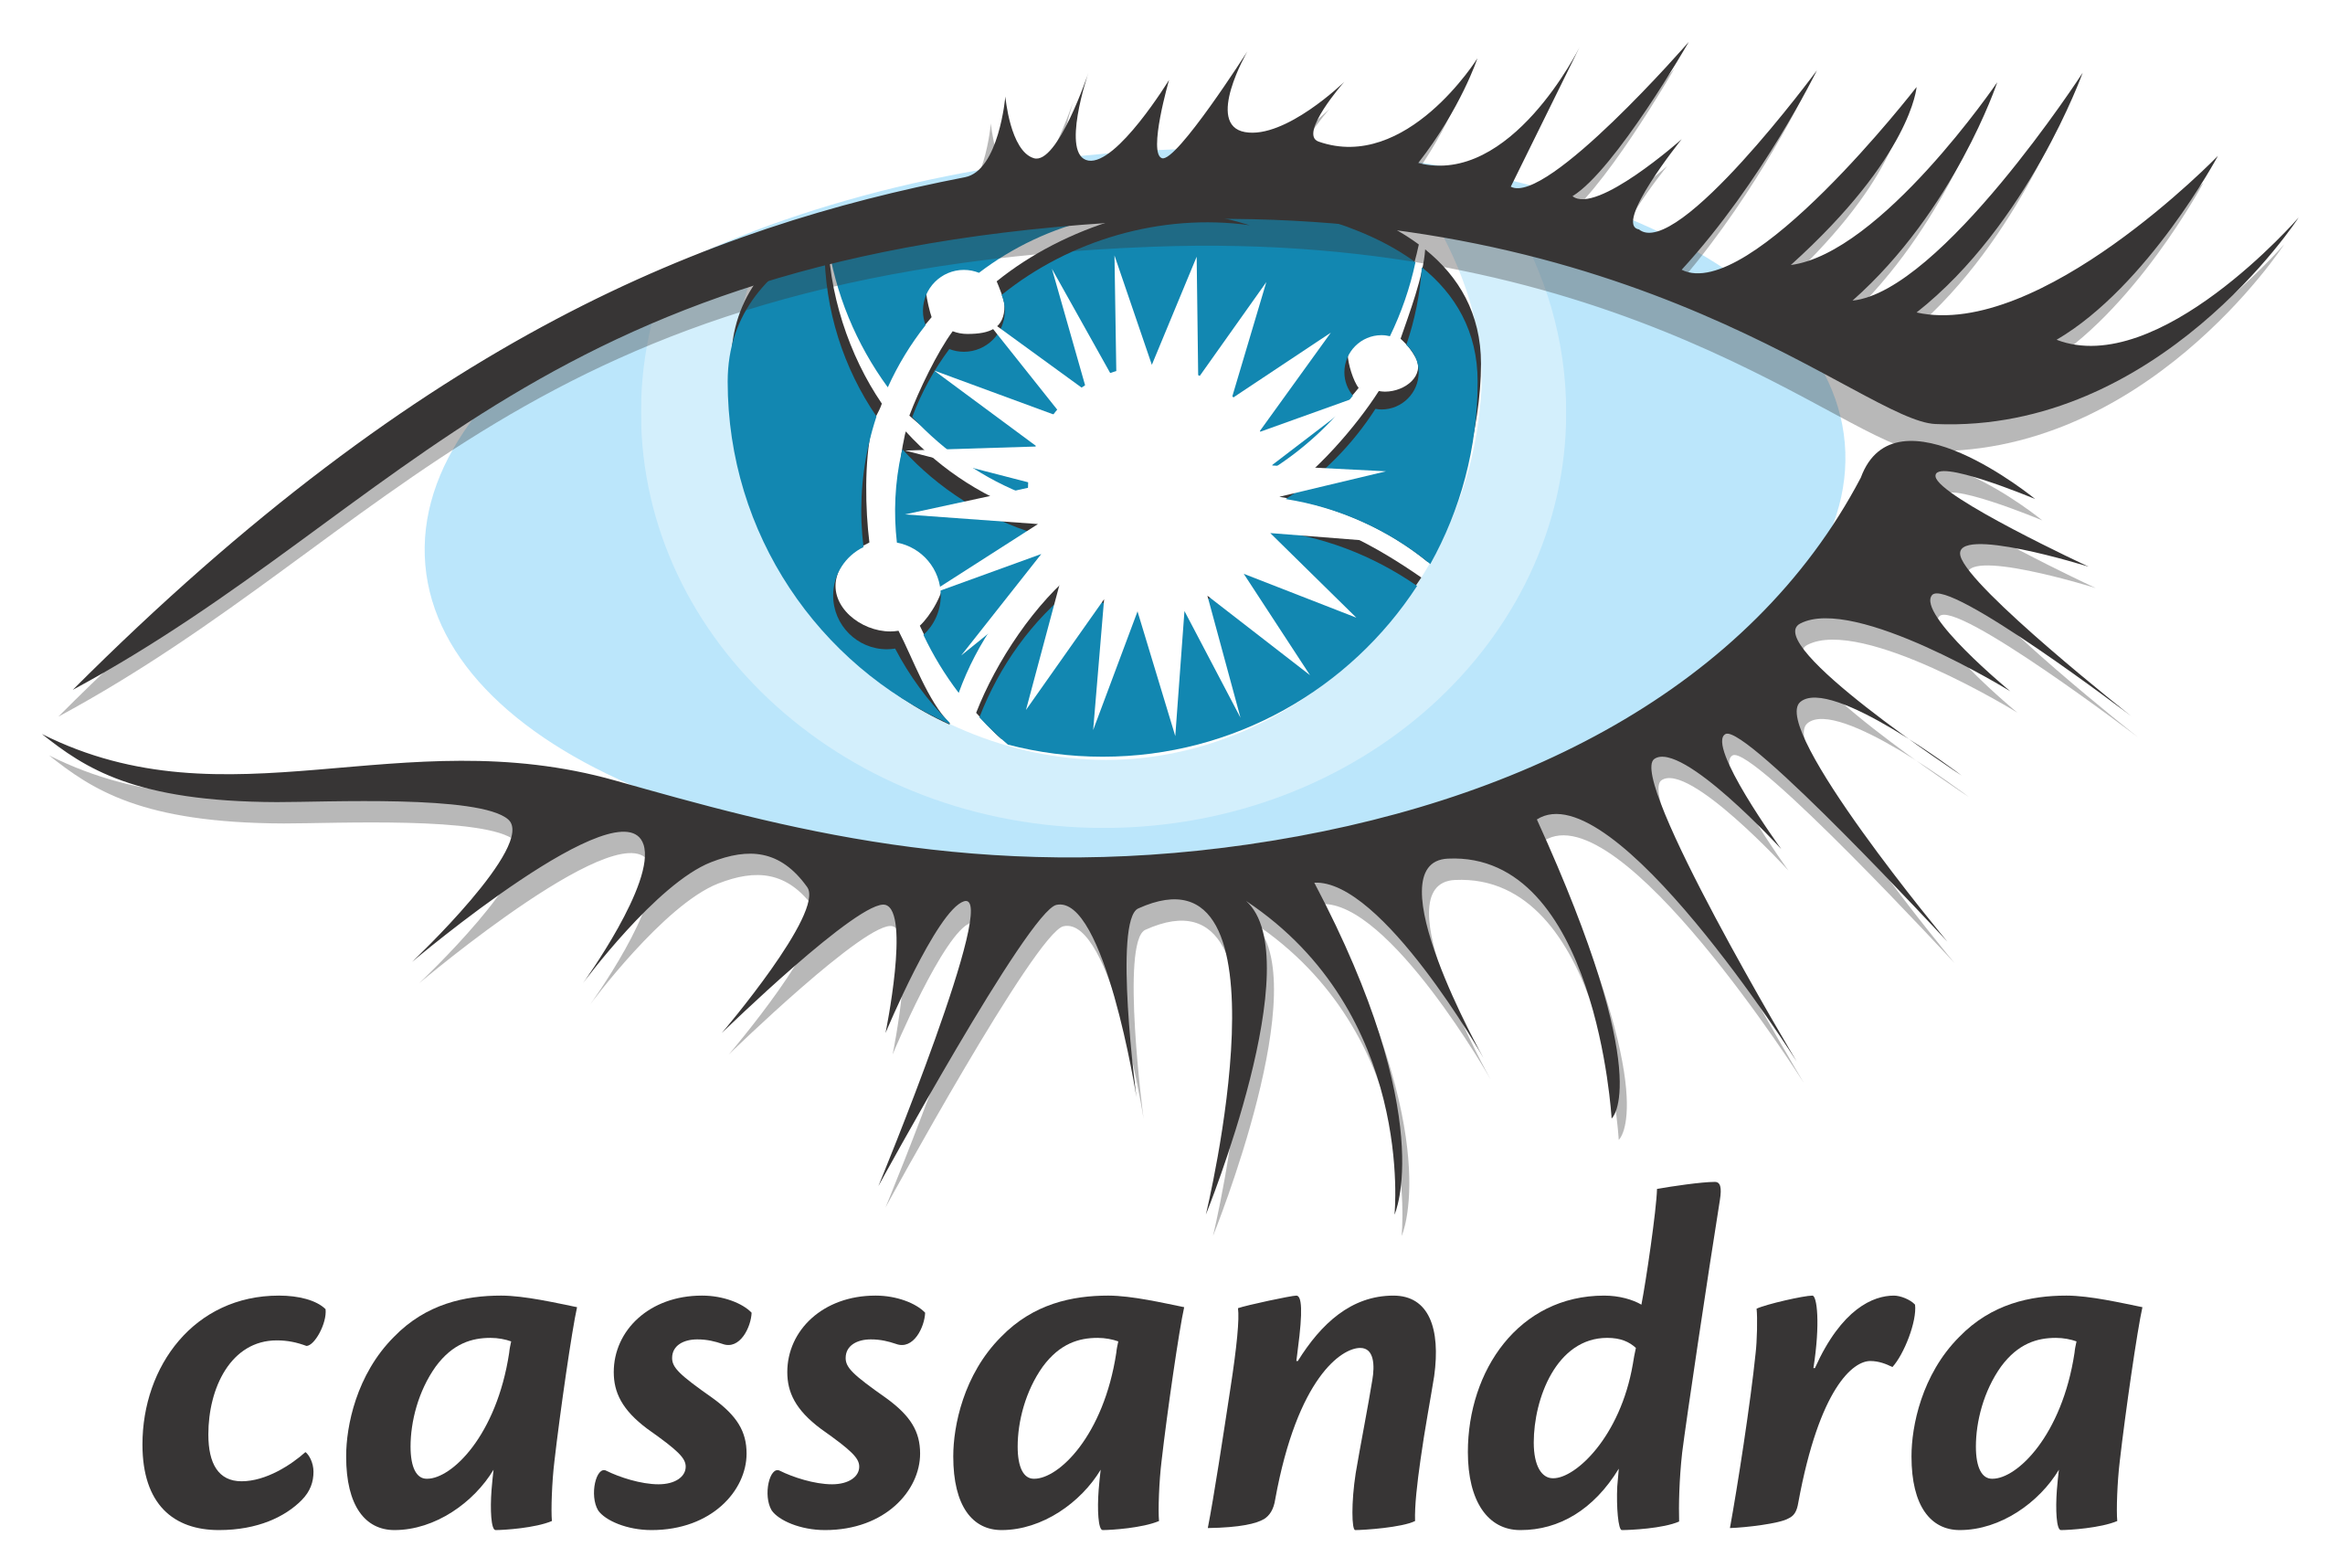 How to Install Cassandra on CentOS - Featured